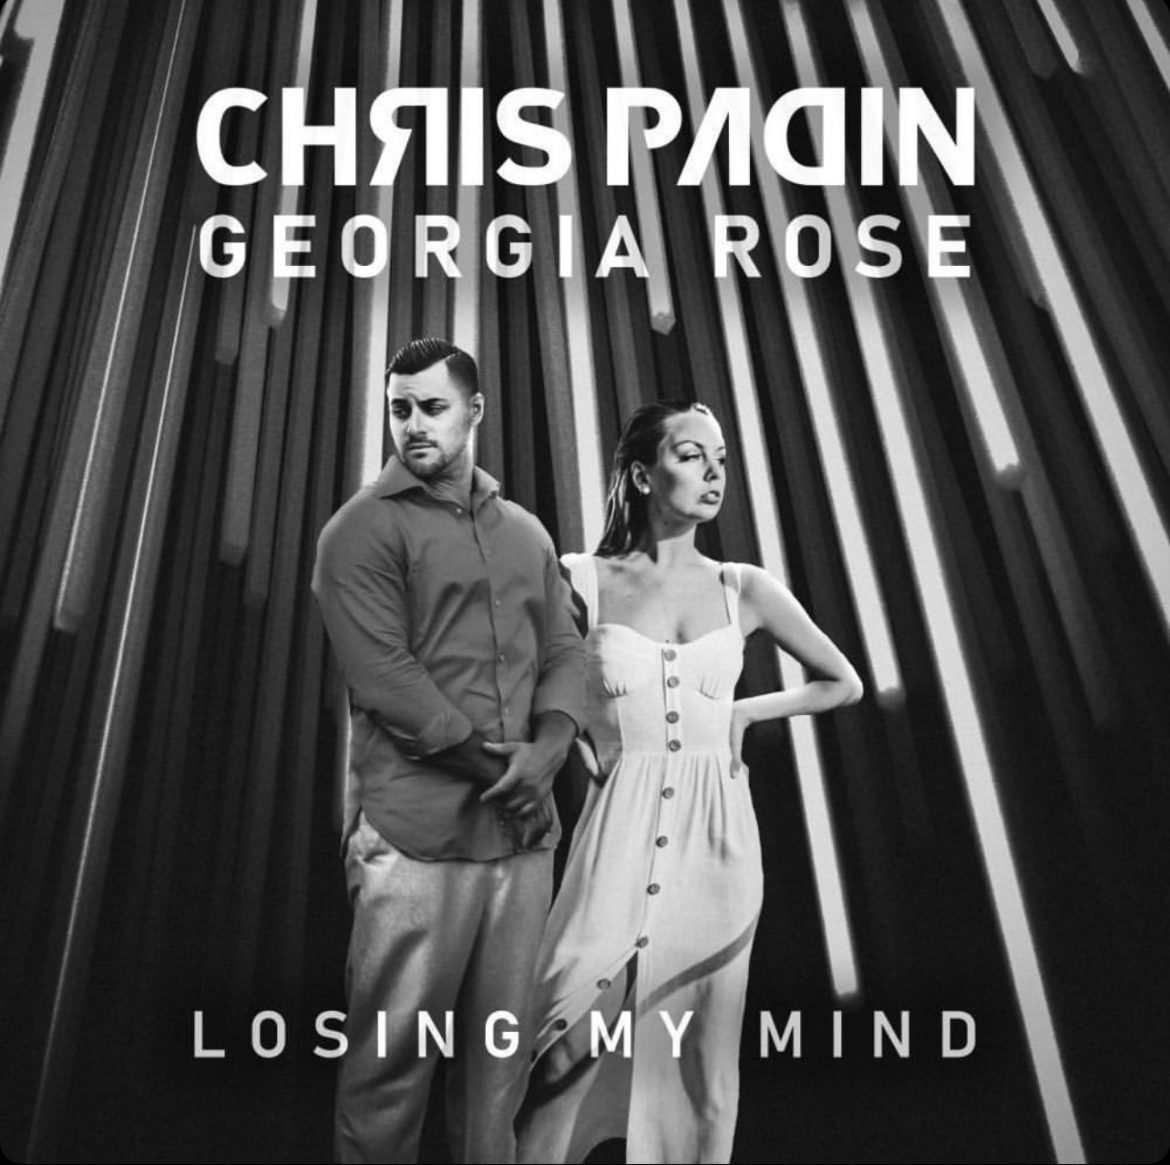 Rising high in Africa, ‘Chris Padin’ and ‘Georgia Rose’ from Bravo’s hit TV show Below deck drop new hit ‘Losing My Mind’